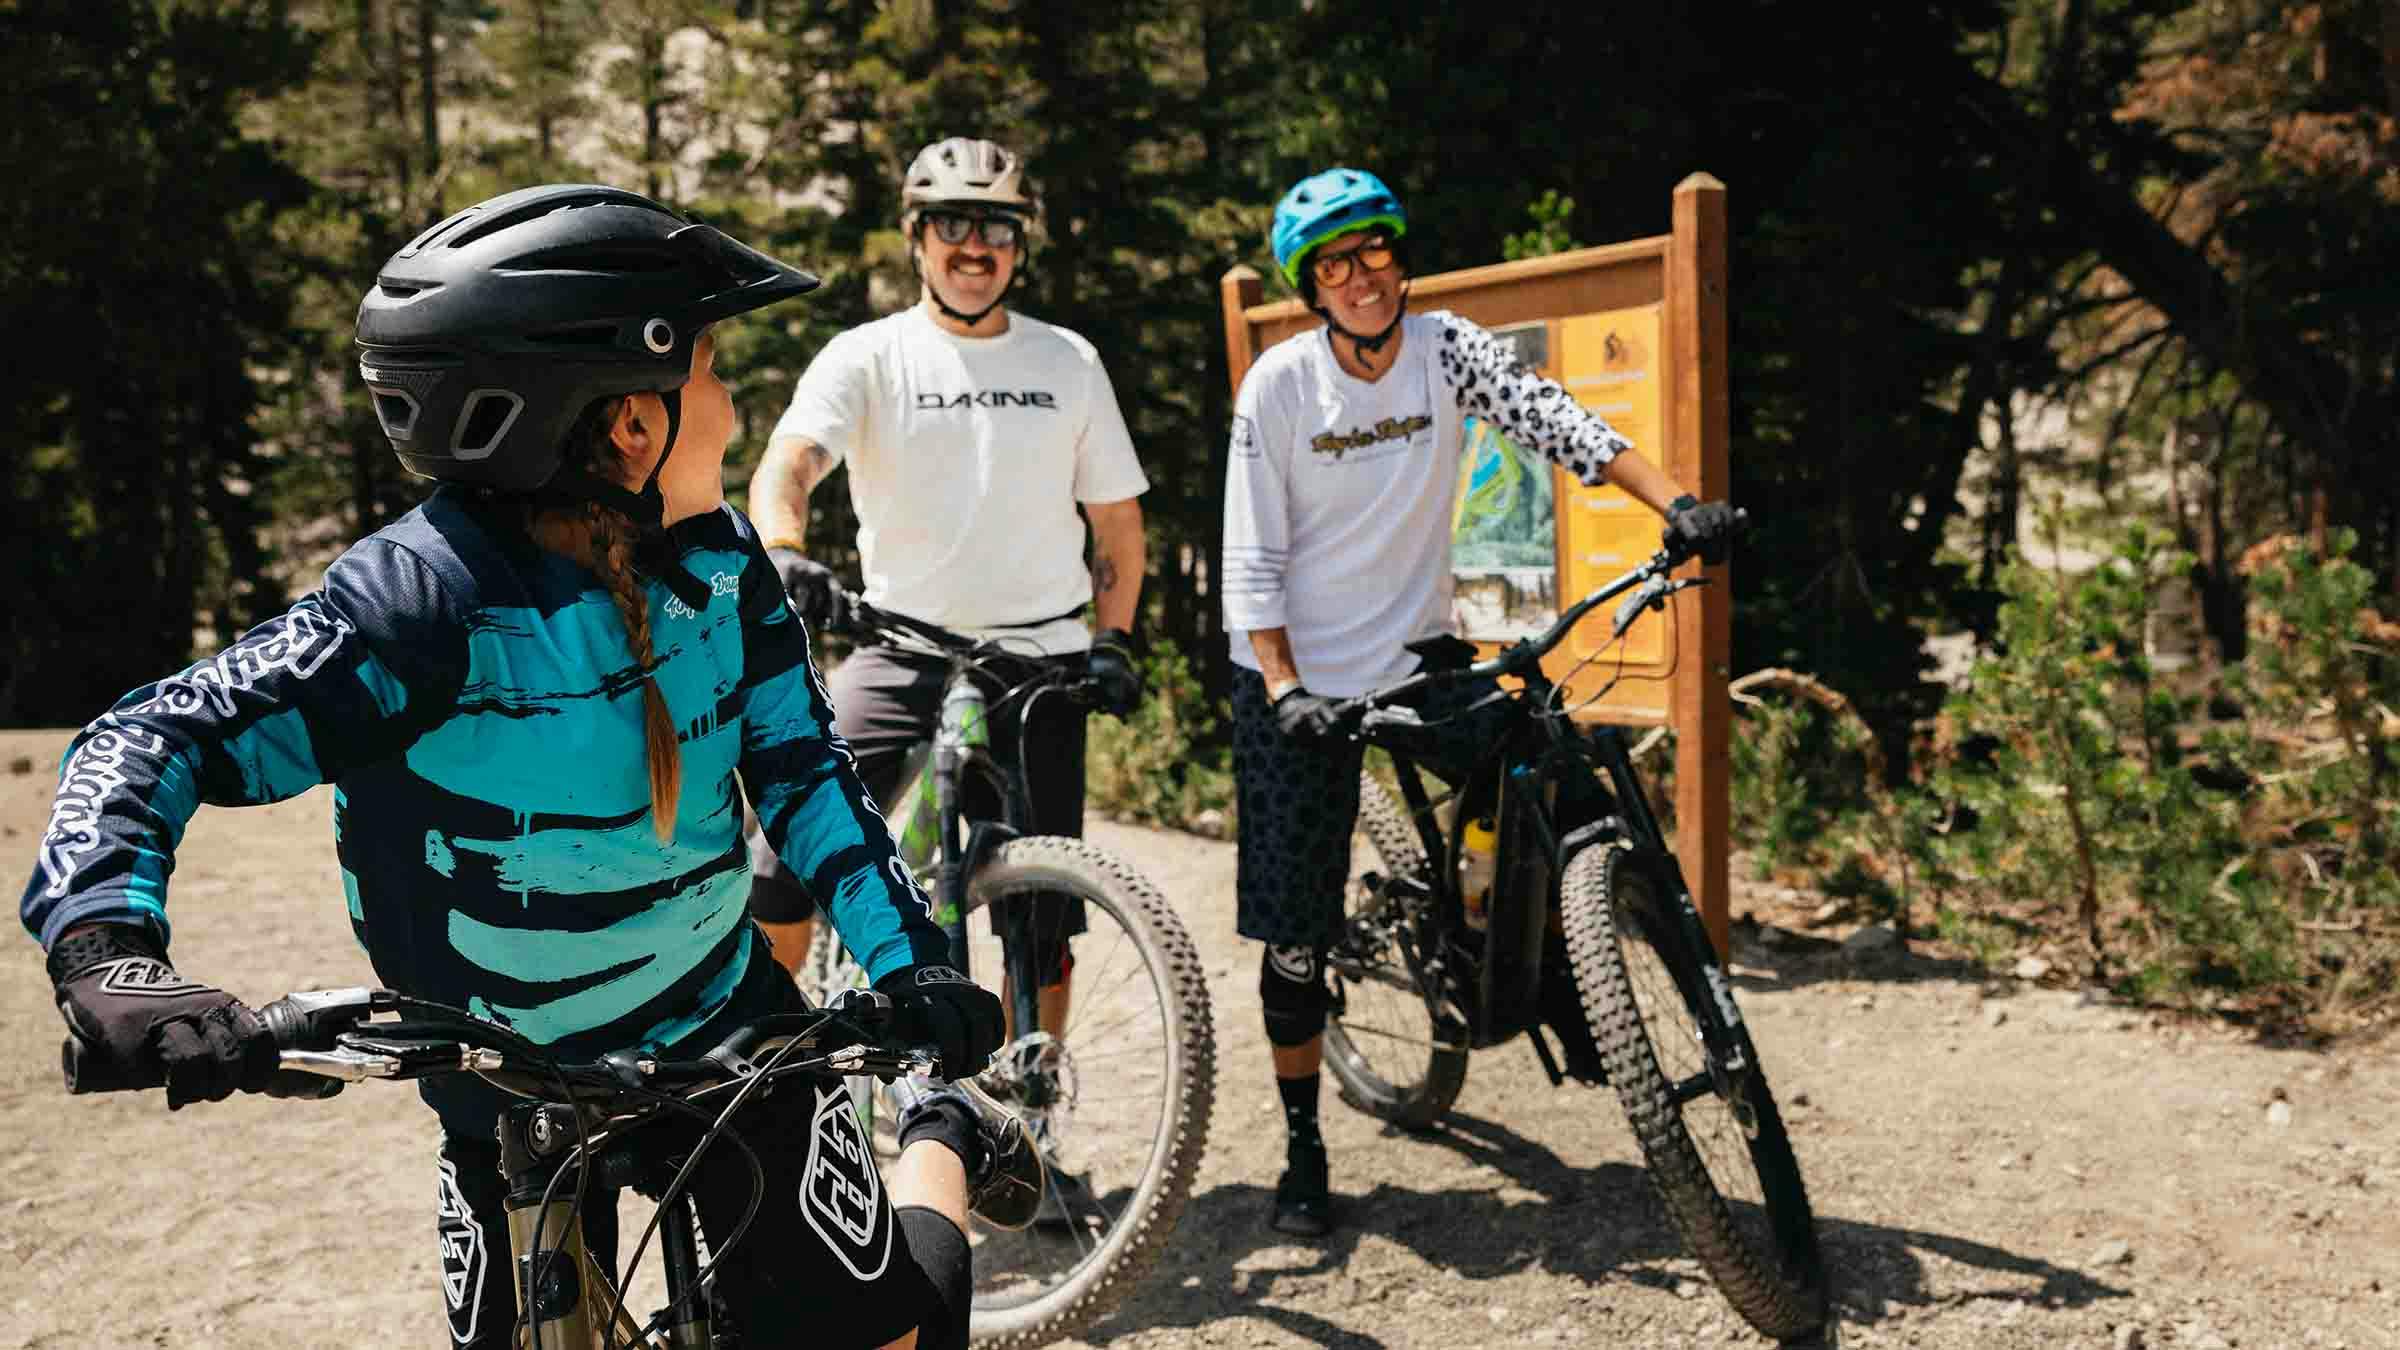 Family at the Mammoth Bike Park